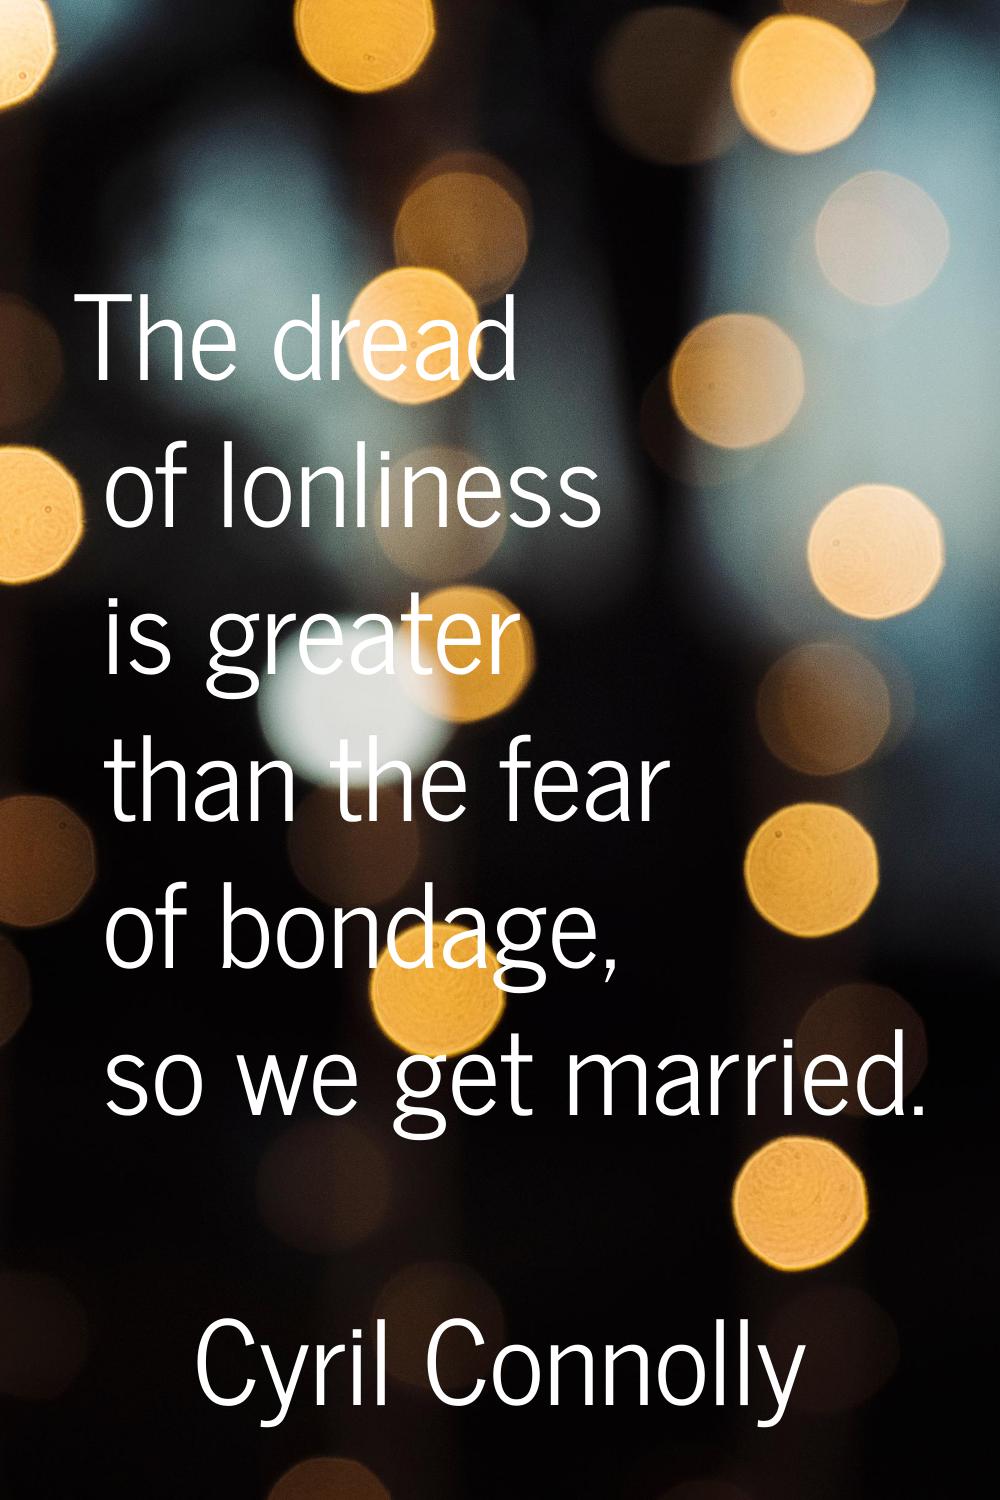 The dread of lonliness is greater than the fear of bondage, so we get married.